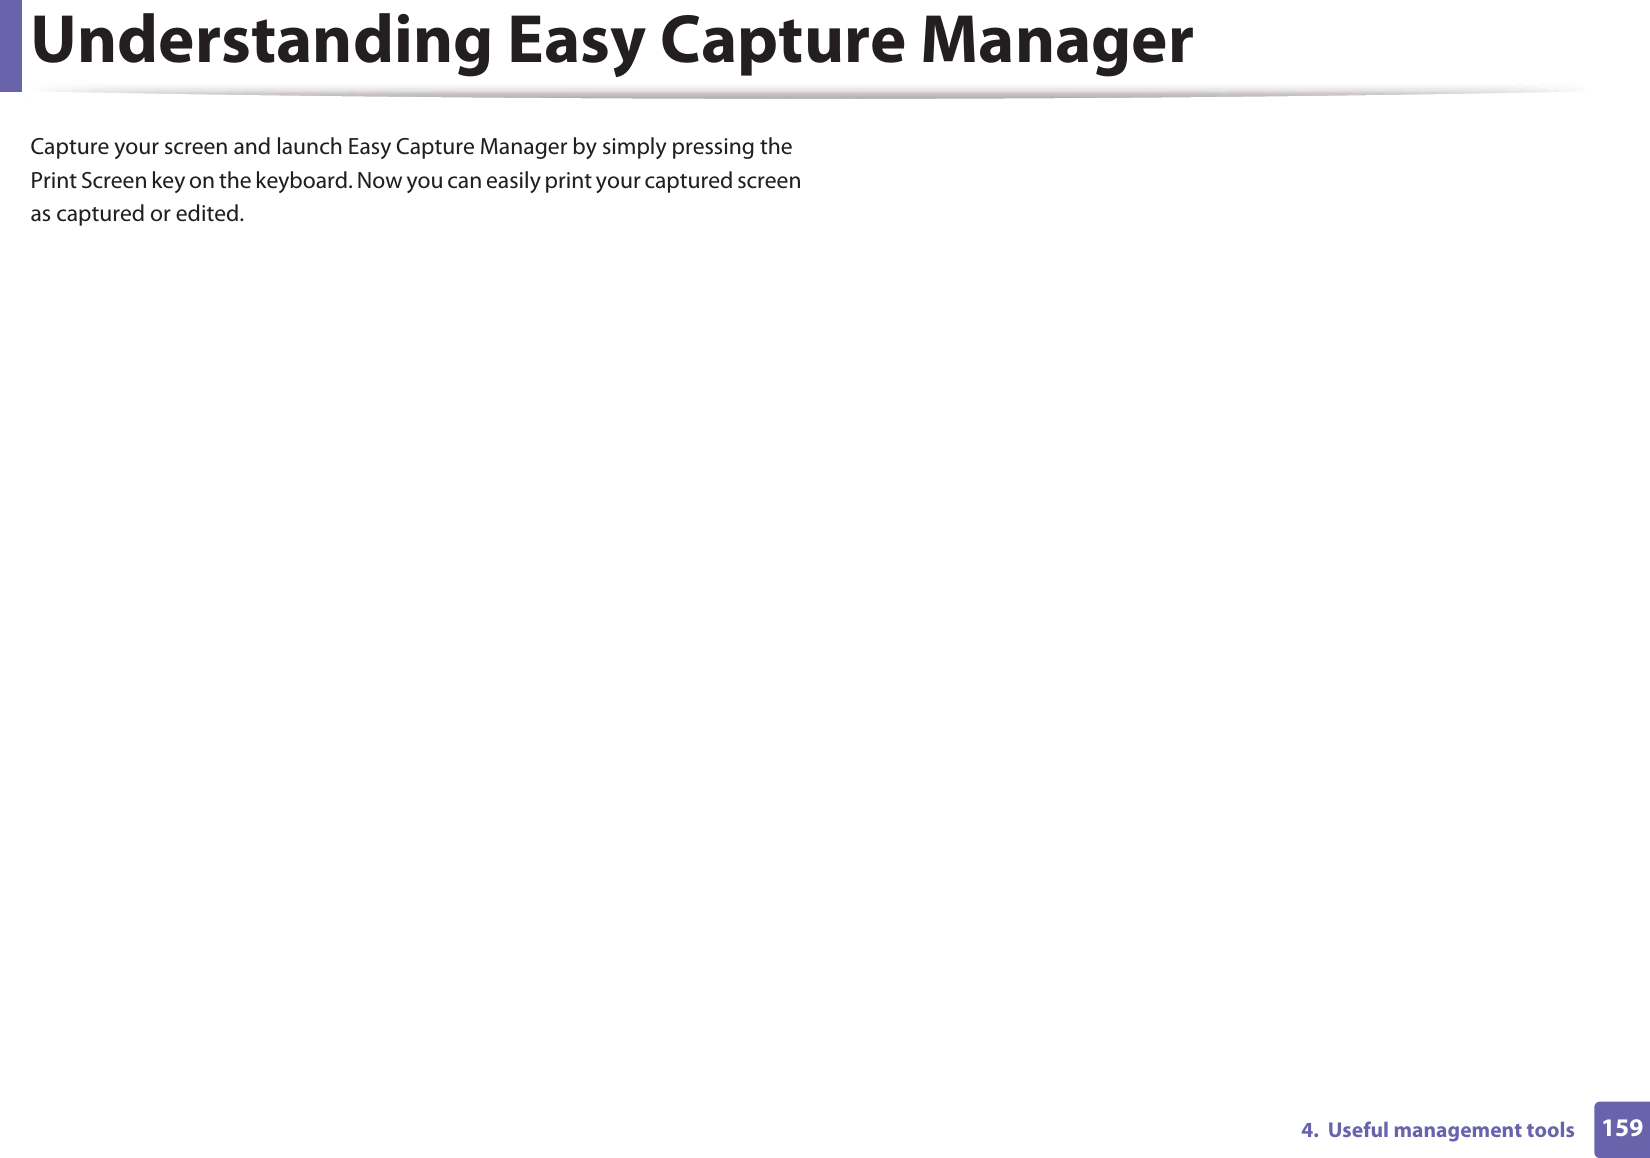 1594.  Useful management toolsUnderstanding Easy Capture ManagerCapture your screen and launch Easy Capture Manager by simply pressing the Print Screen key on the keyboard. Now you can easily print your captured screen as captured or edited. 